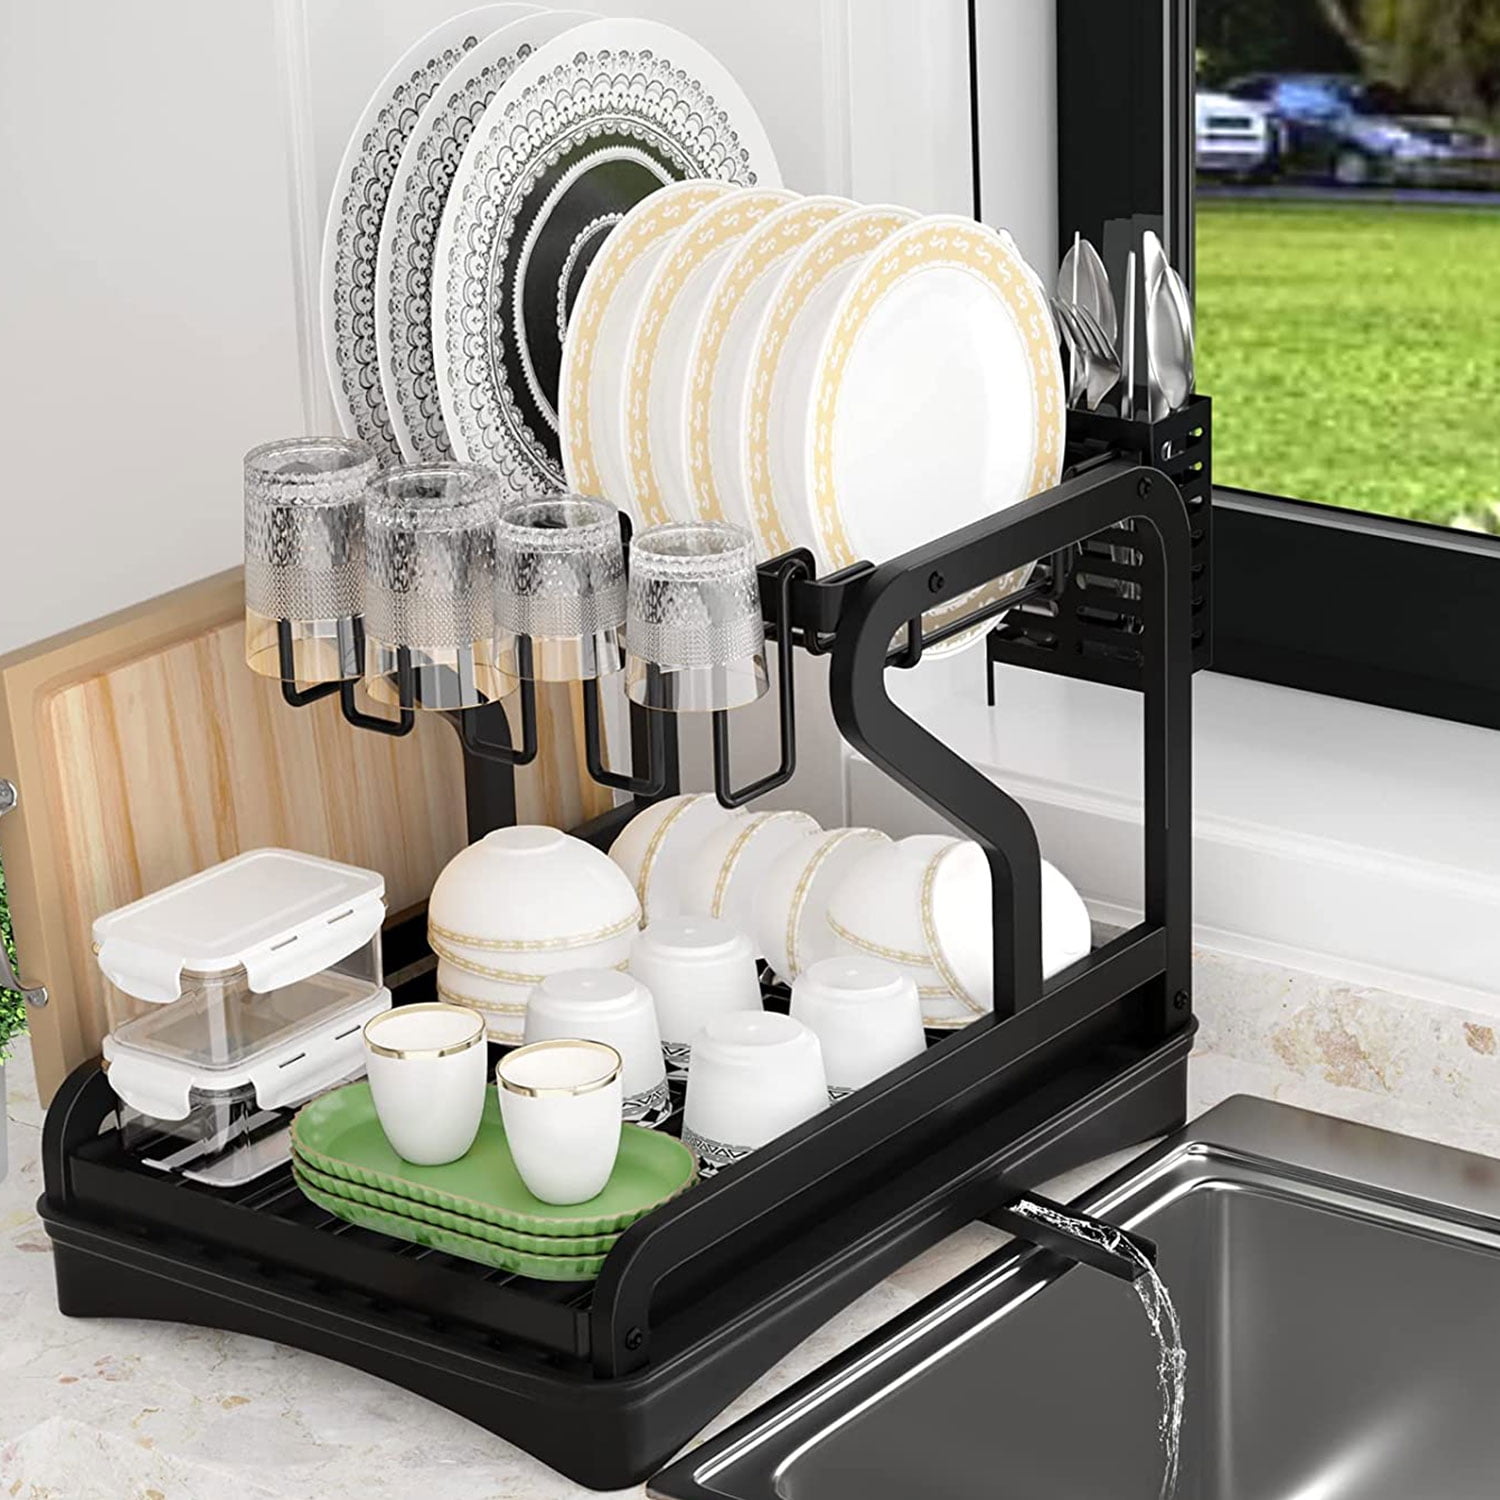 BOOSINY Dish Drying Rack for Kitchen Counter, 2 Tier Large Dish Drainer  with Drainboard Set, Cutlery Holder, Cutting Board Holder and Extra Dryer  Mat